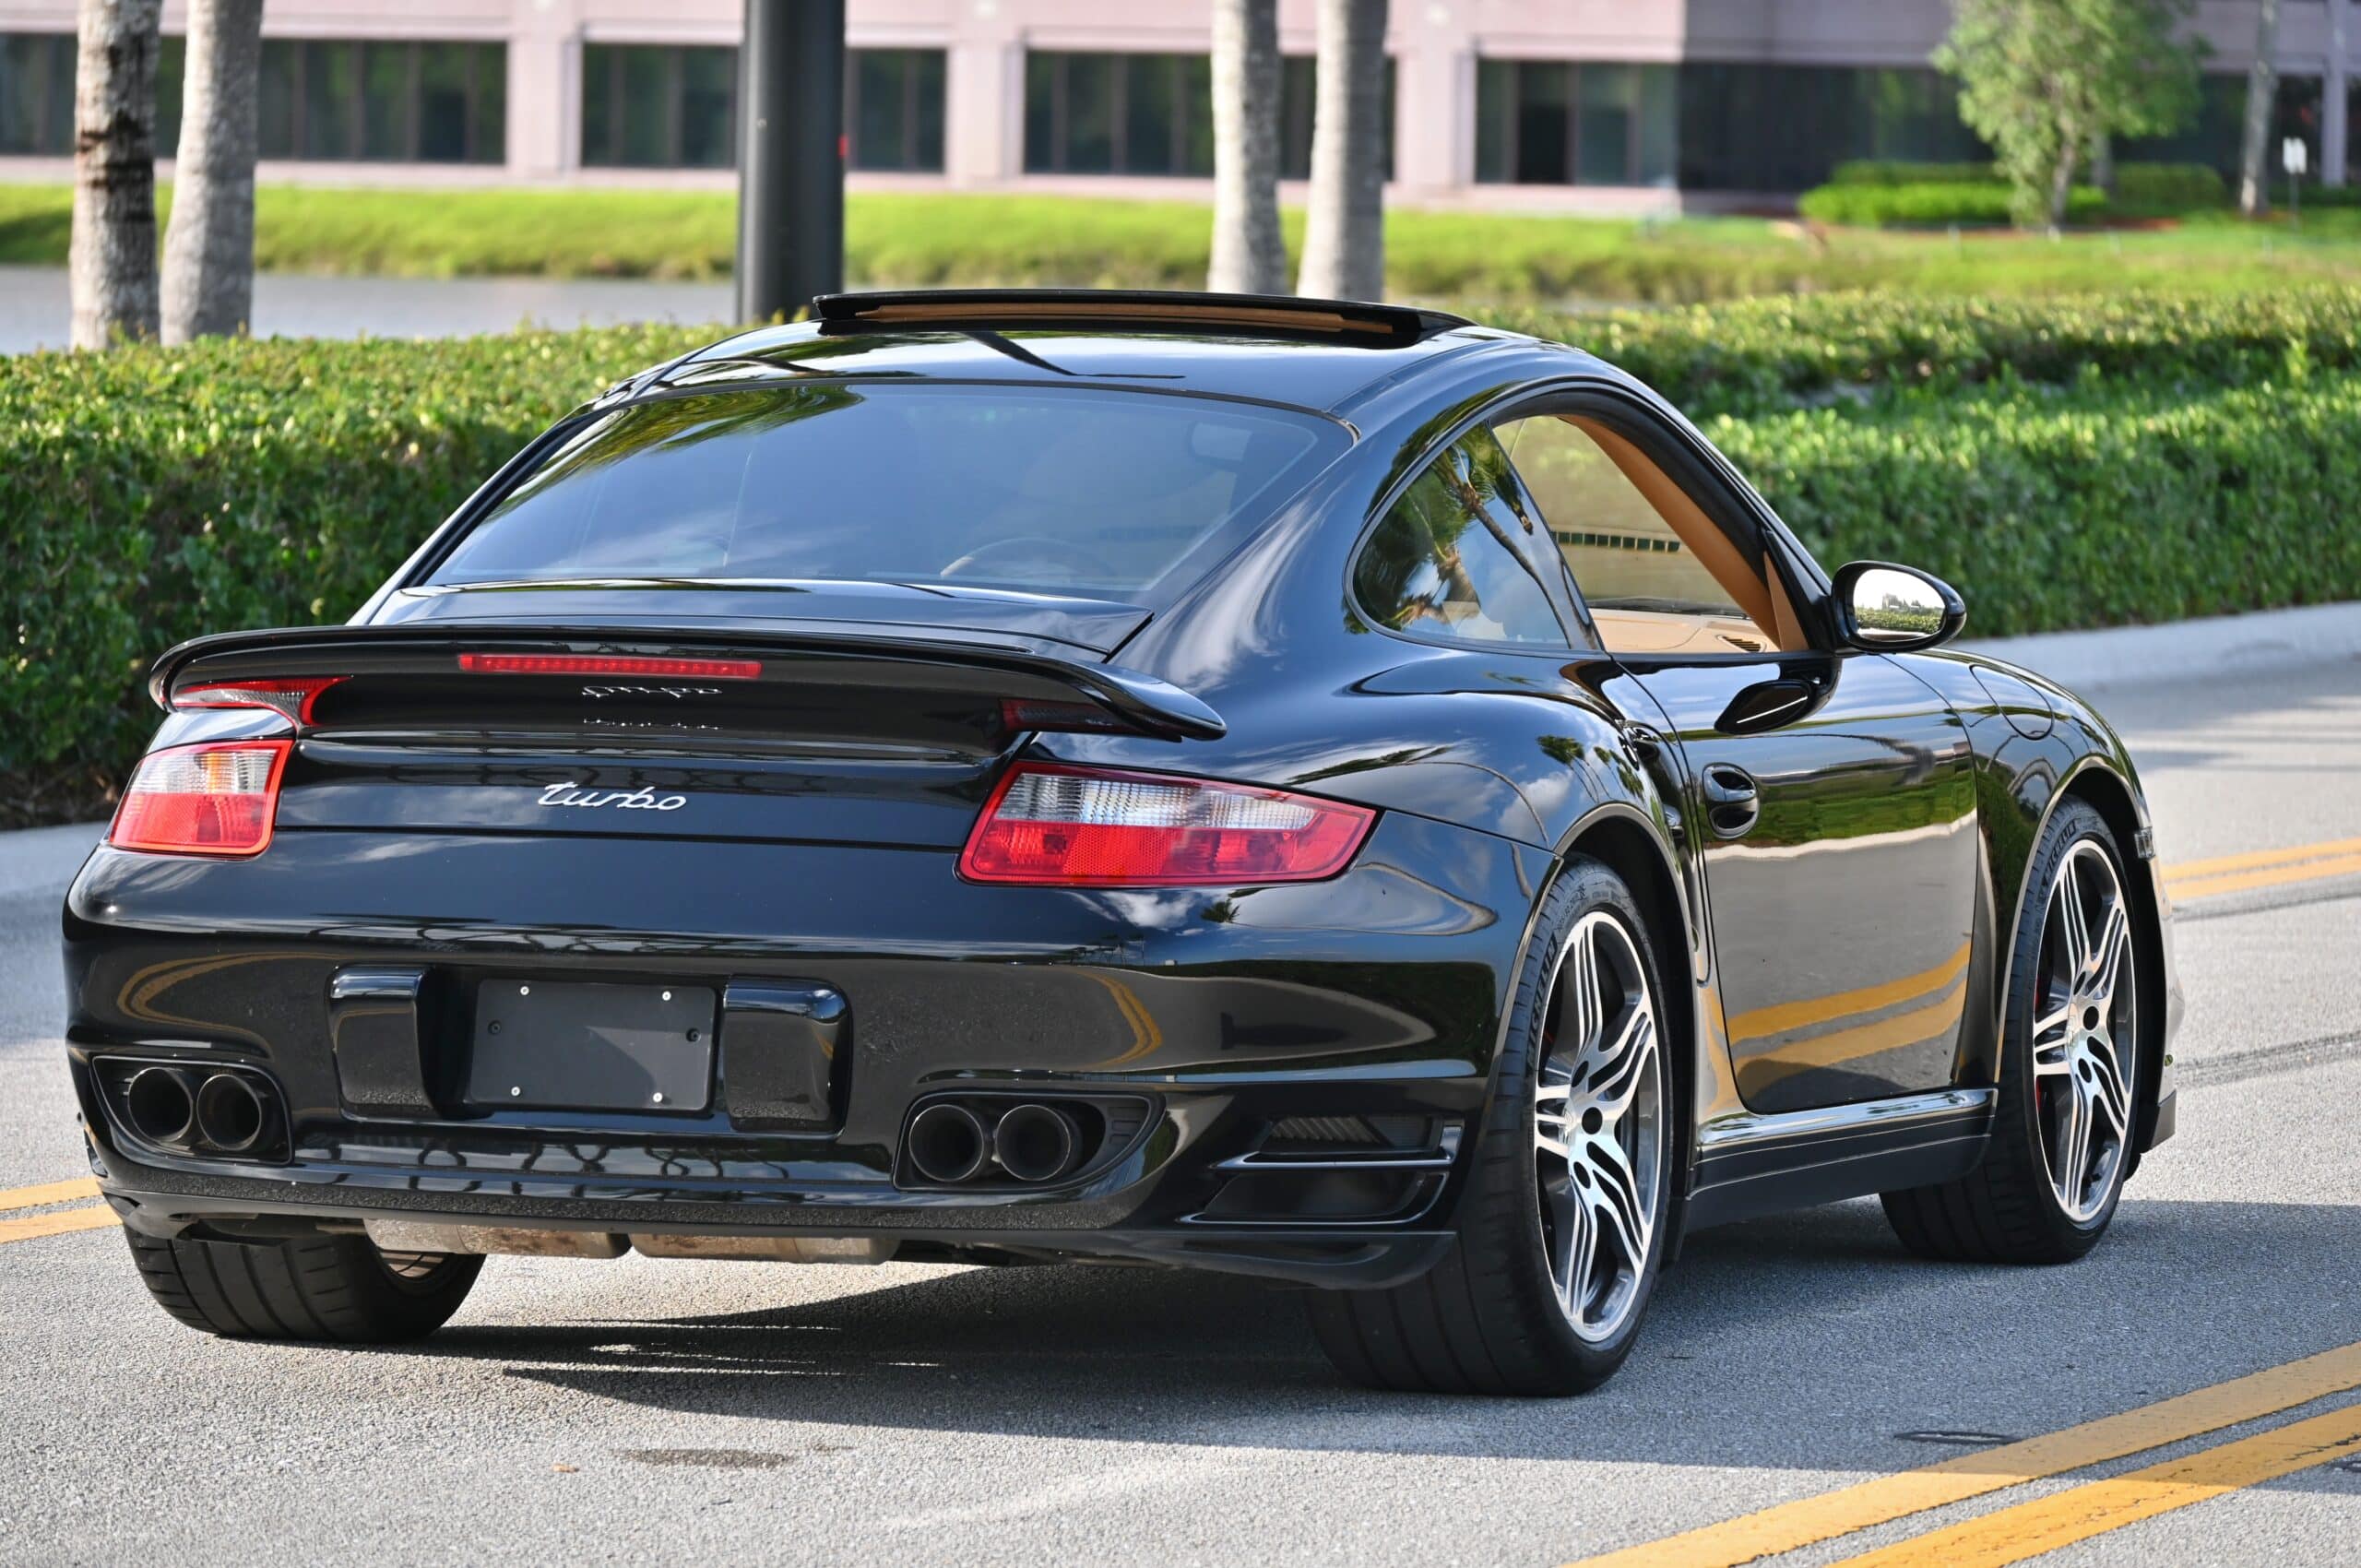 2007 Porsche 911 Turbo (997.1) 35k miles | All original paint metered | Service records | 6 Speed Manual | Beautiful condition